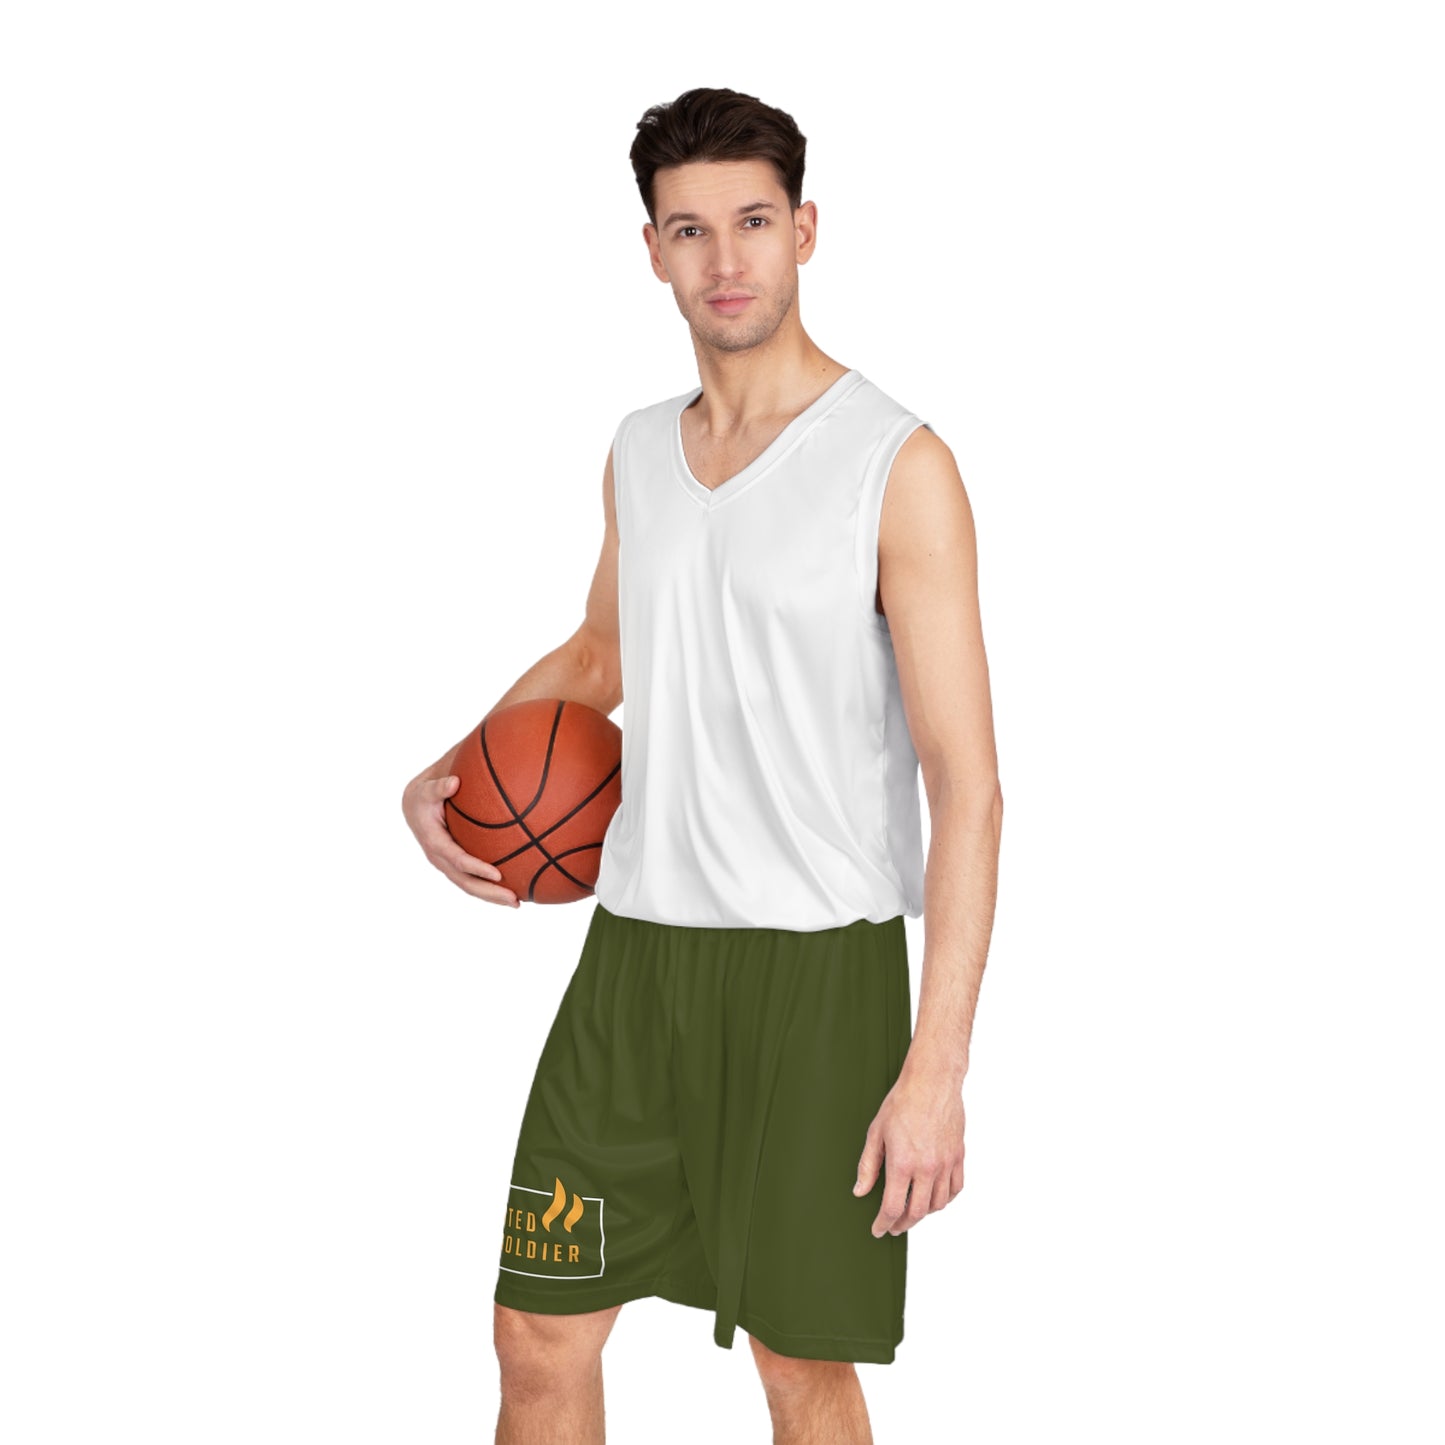 The Scented Soldier Basketball Shorts